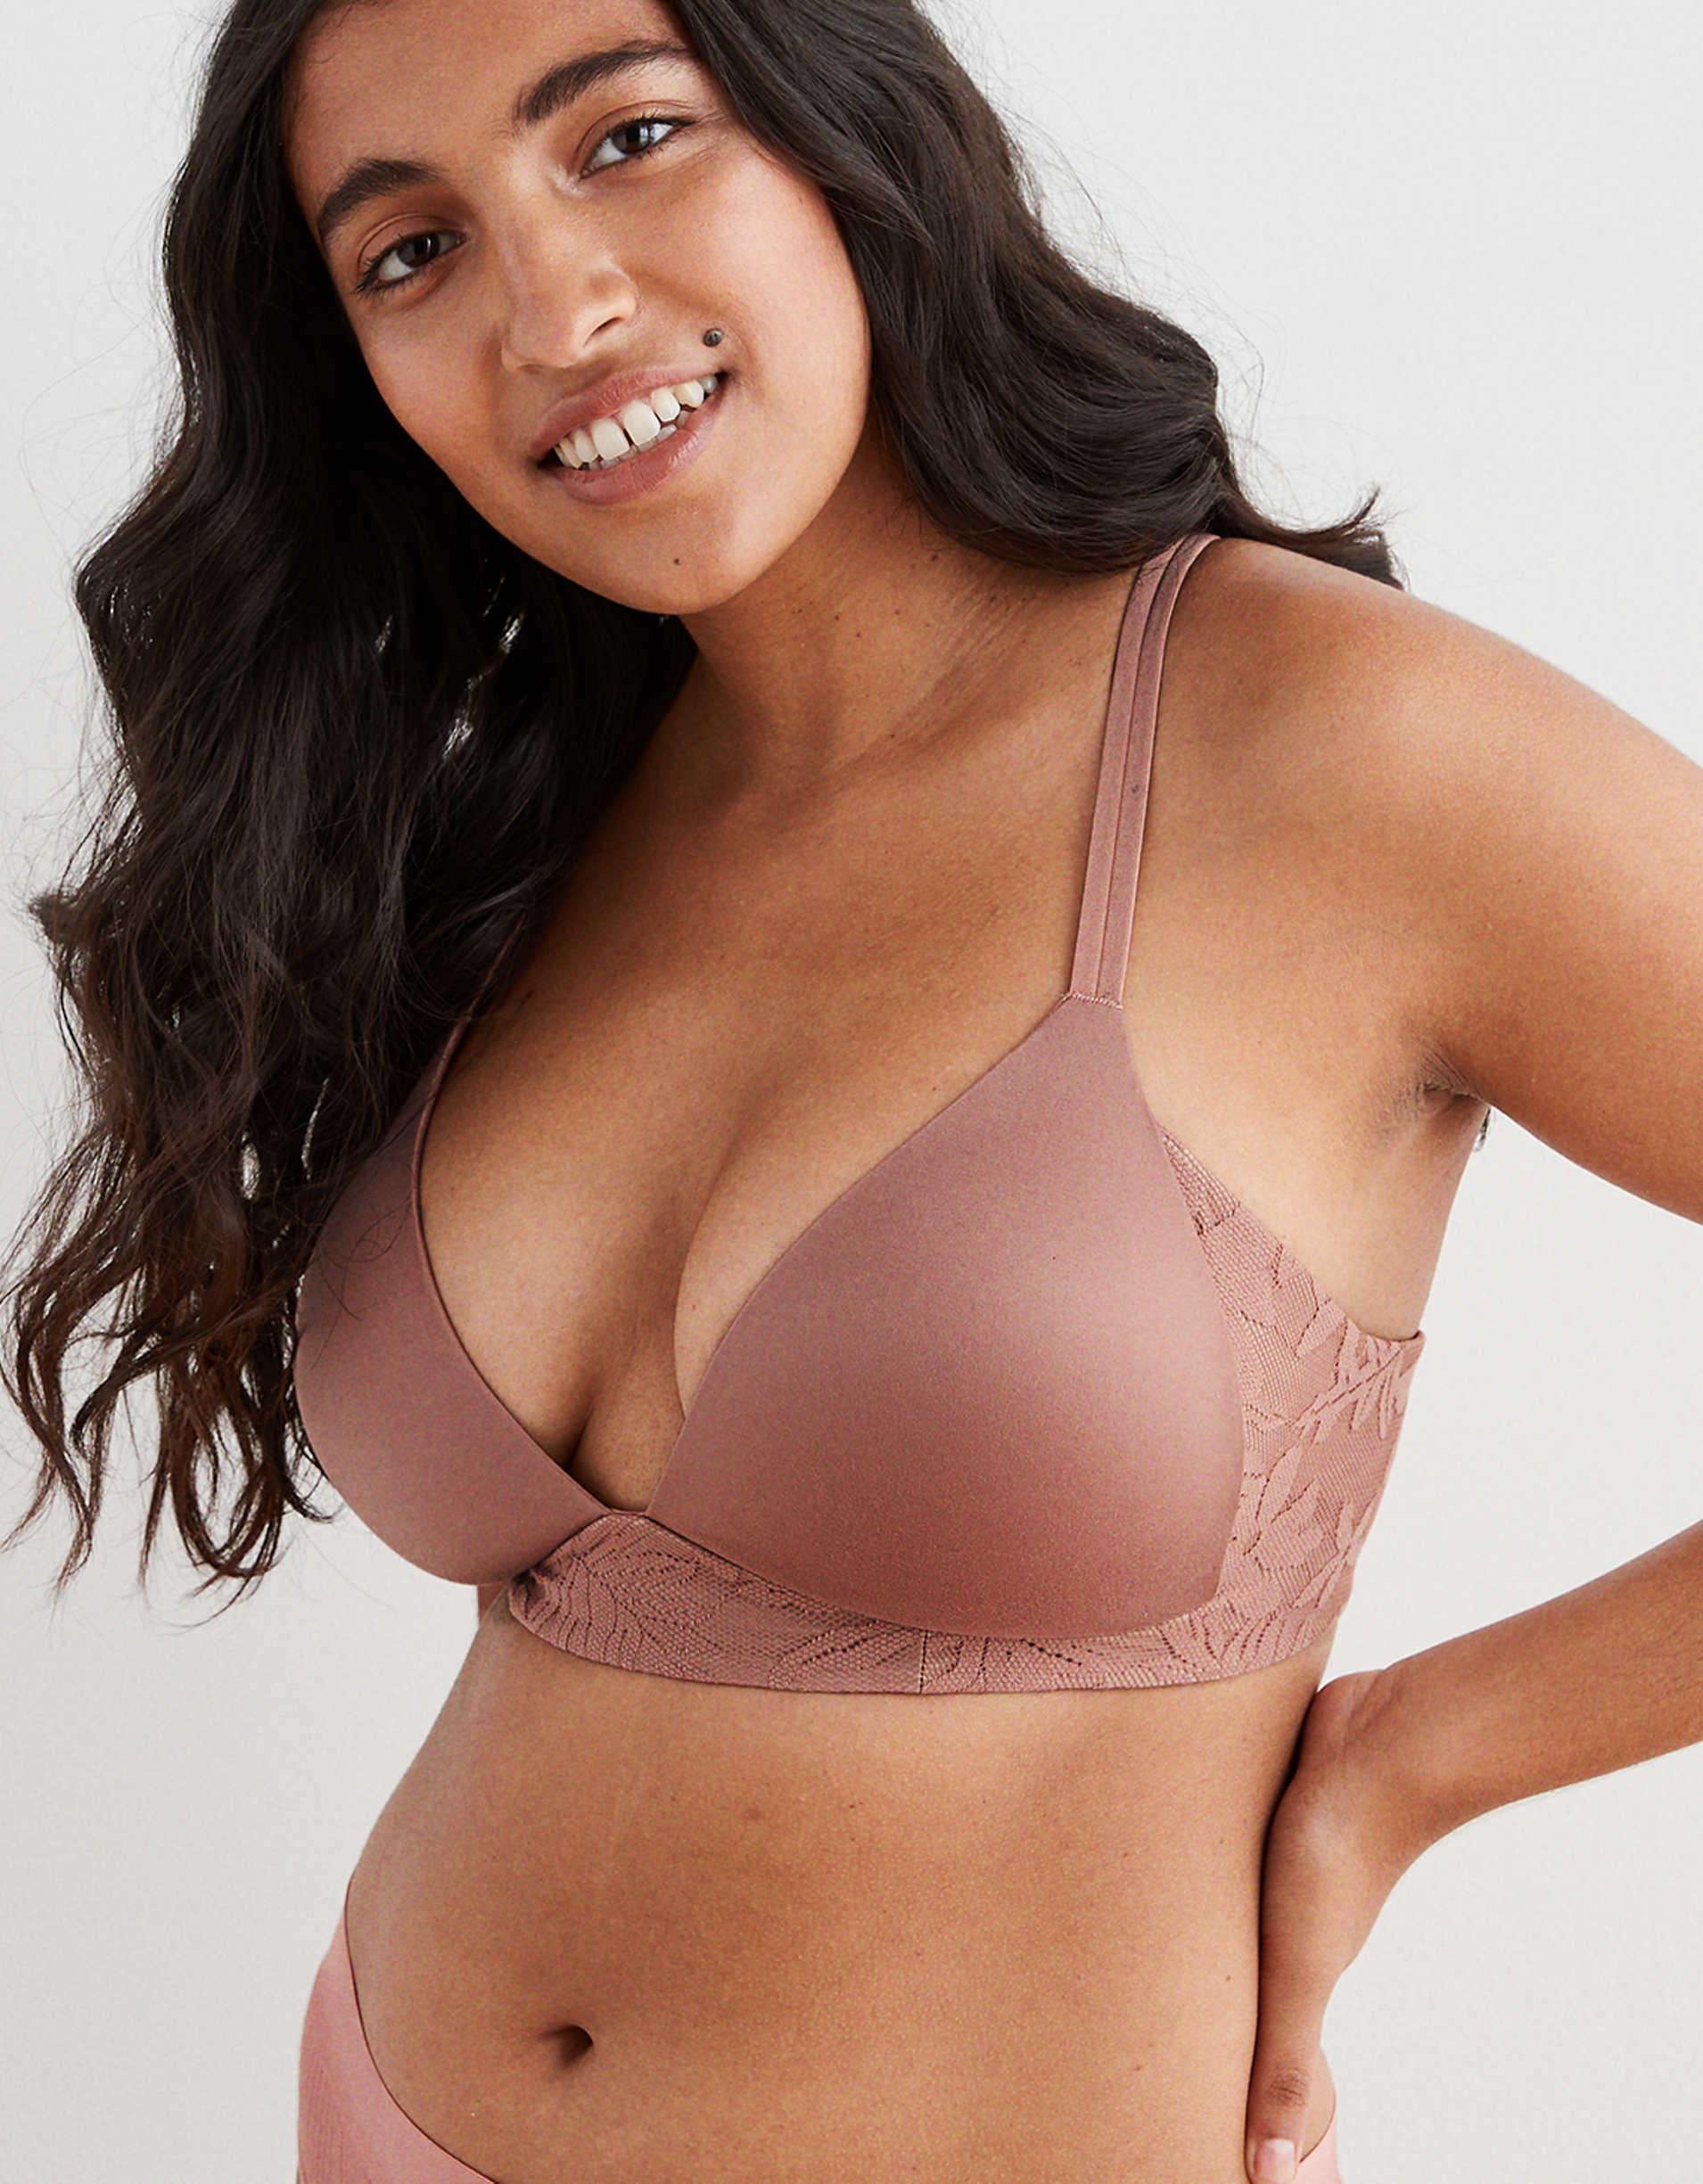 person wearing a light brown wireless bra that looks like i has the coverage and support of a traditional wired bra, floral pattern on band